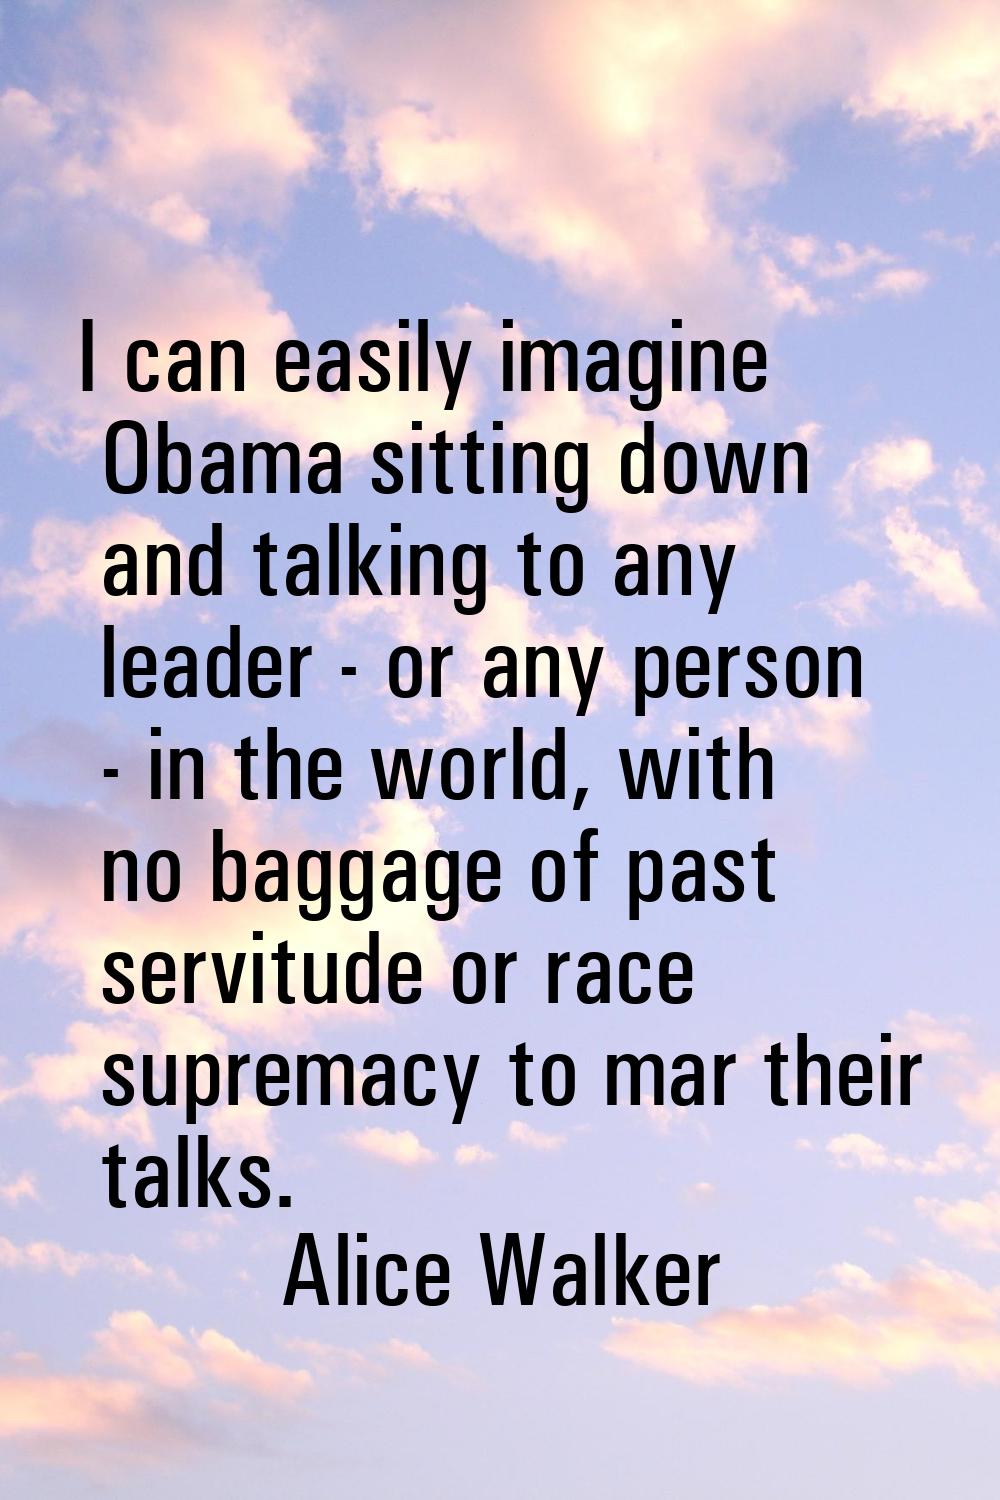 I can easily imagine Obama sitting down and talking to any leader - or any person - in the world, w